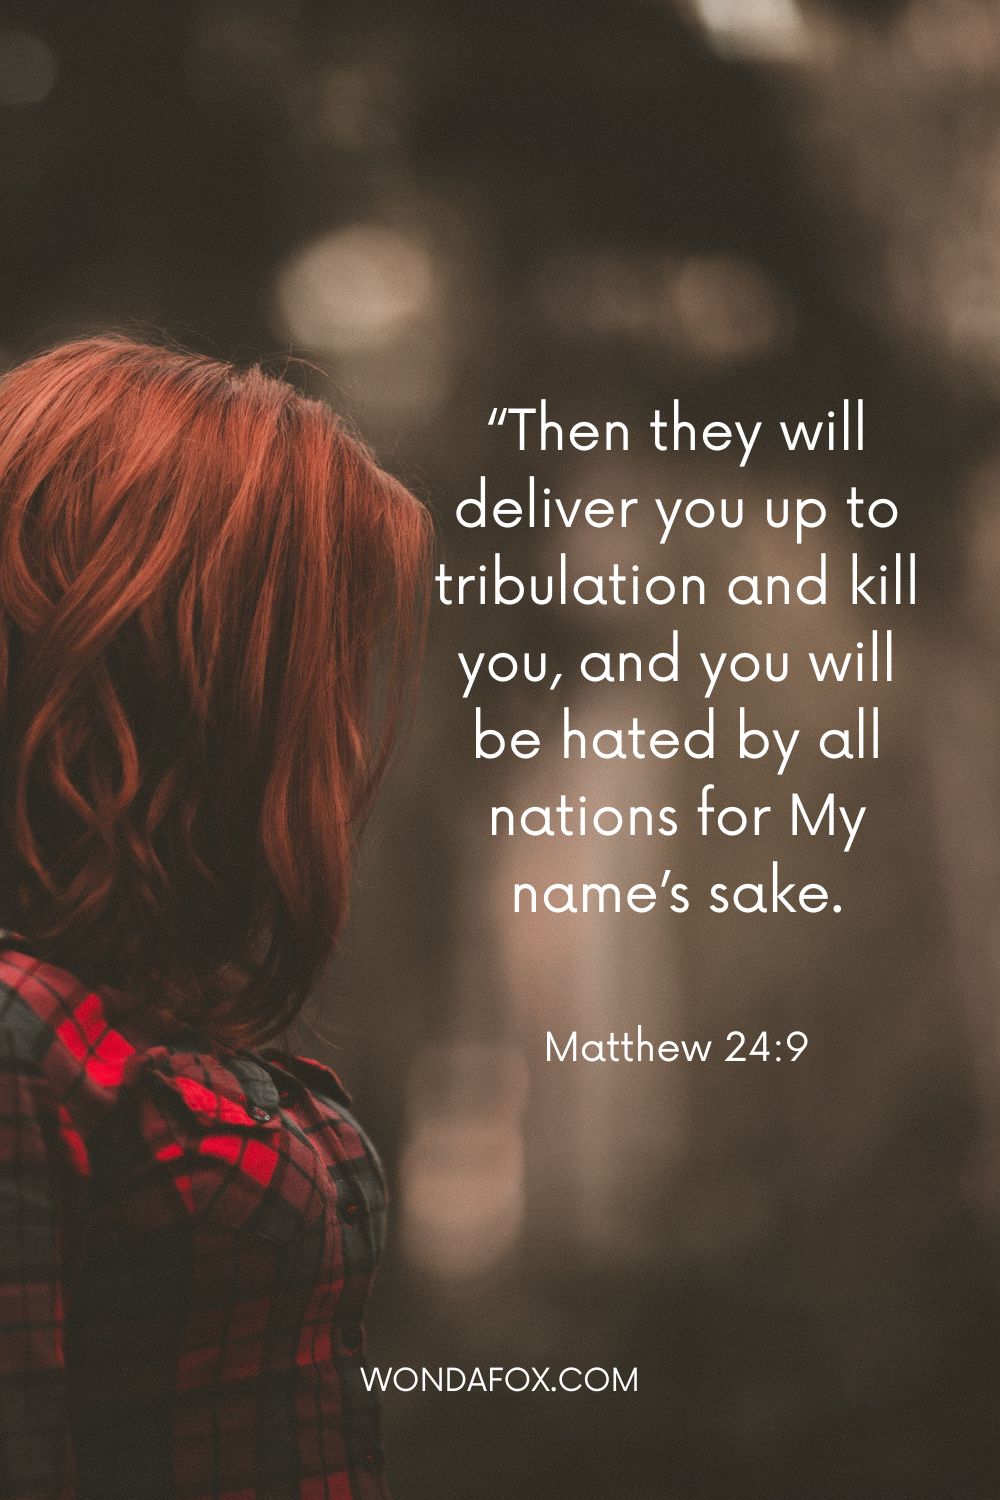 “Then they will deliver you up to tribulation and kill you, and you will be hated by all nations for My name’s sake.